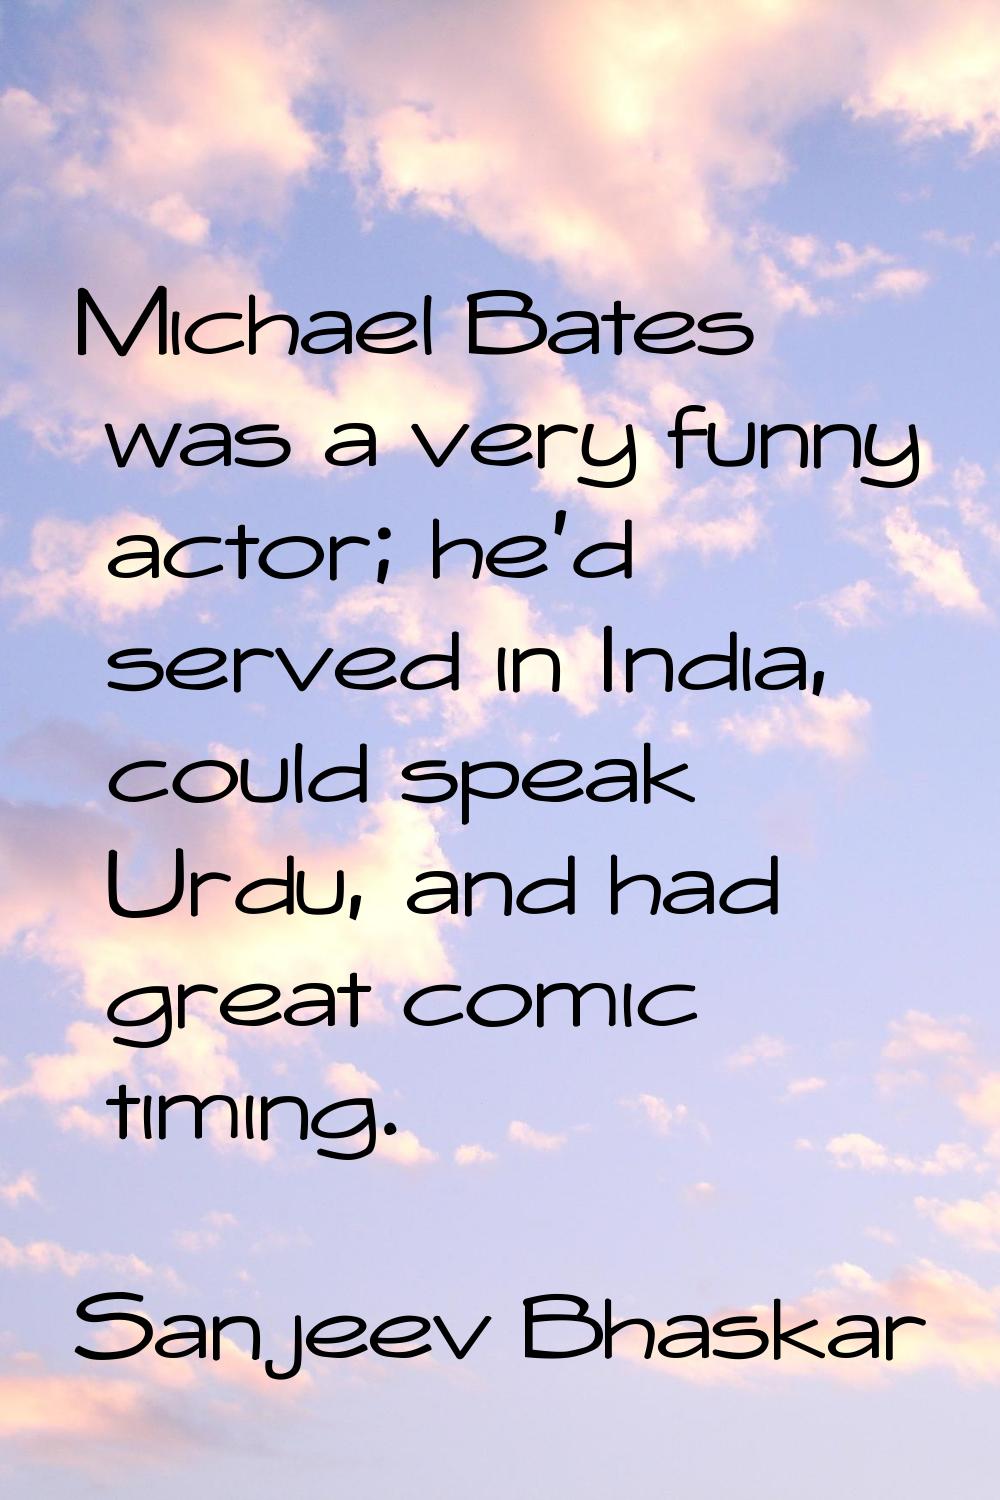 Michael Bates was a very funny actor; he'd served in India, could speak Urdu, and had great comic t